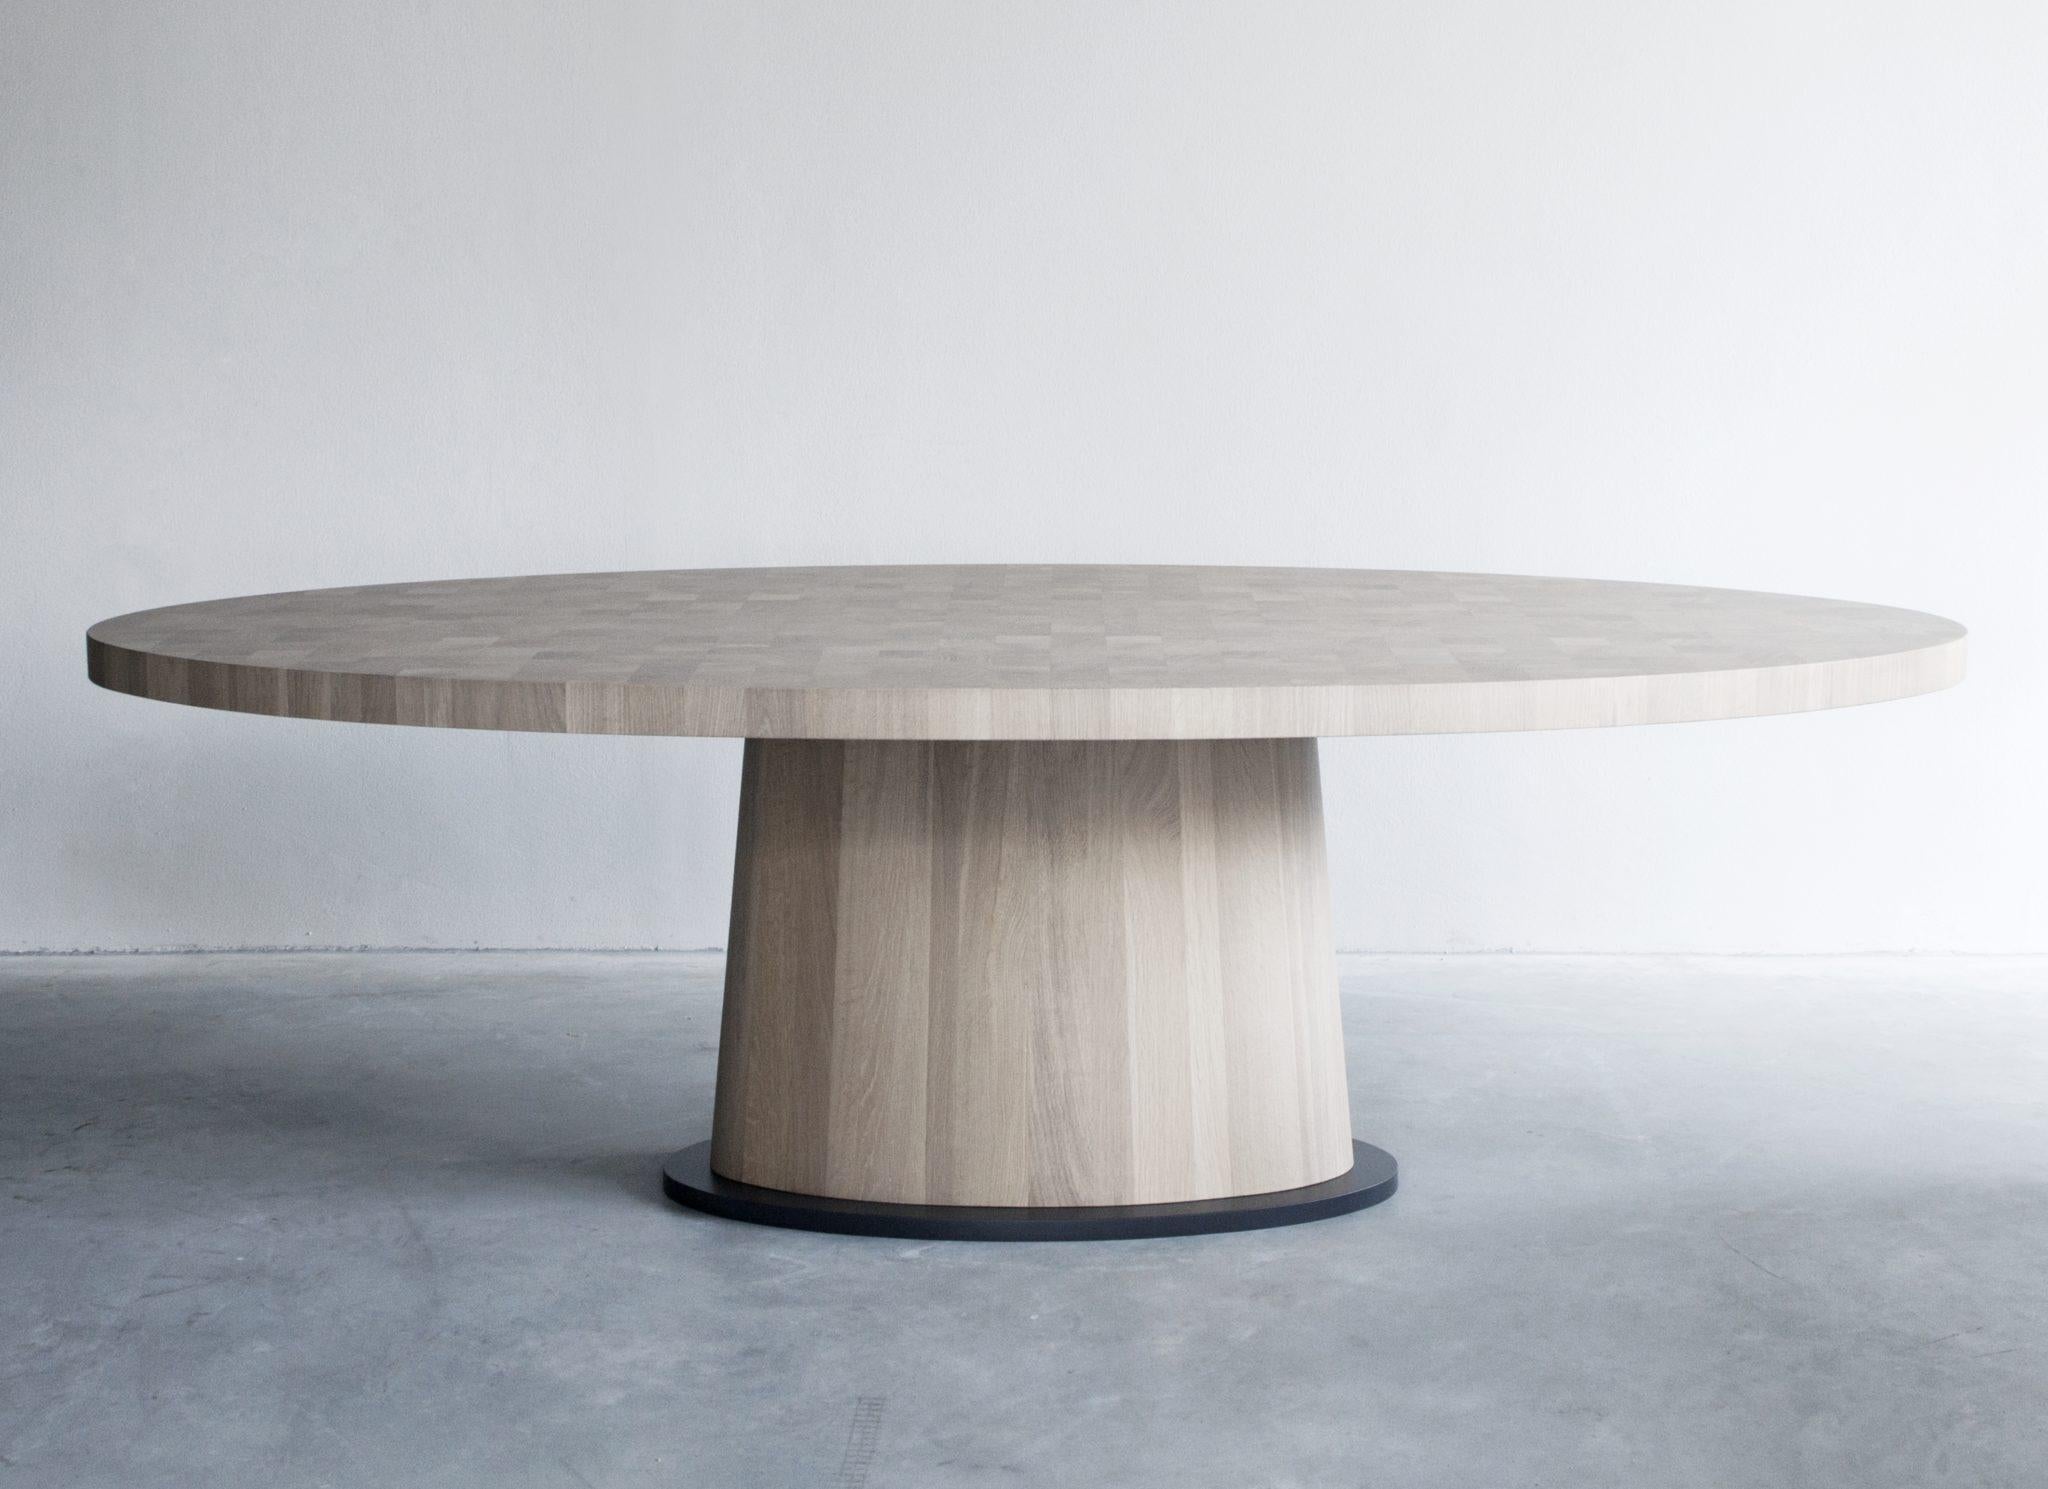 Kops oval table by Van Rossum
Dimensions: D245 x W133 x H75 cm
Materials: Oak, Steel.

The wood is available in all standard Van Rossum colors, or in a matching finish to customer’s own sample.
The steel is available in four colors or in any